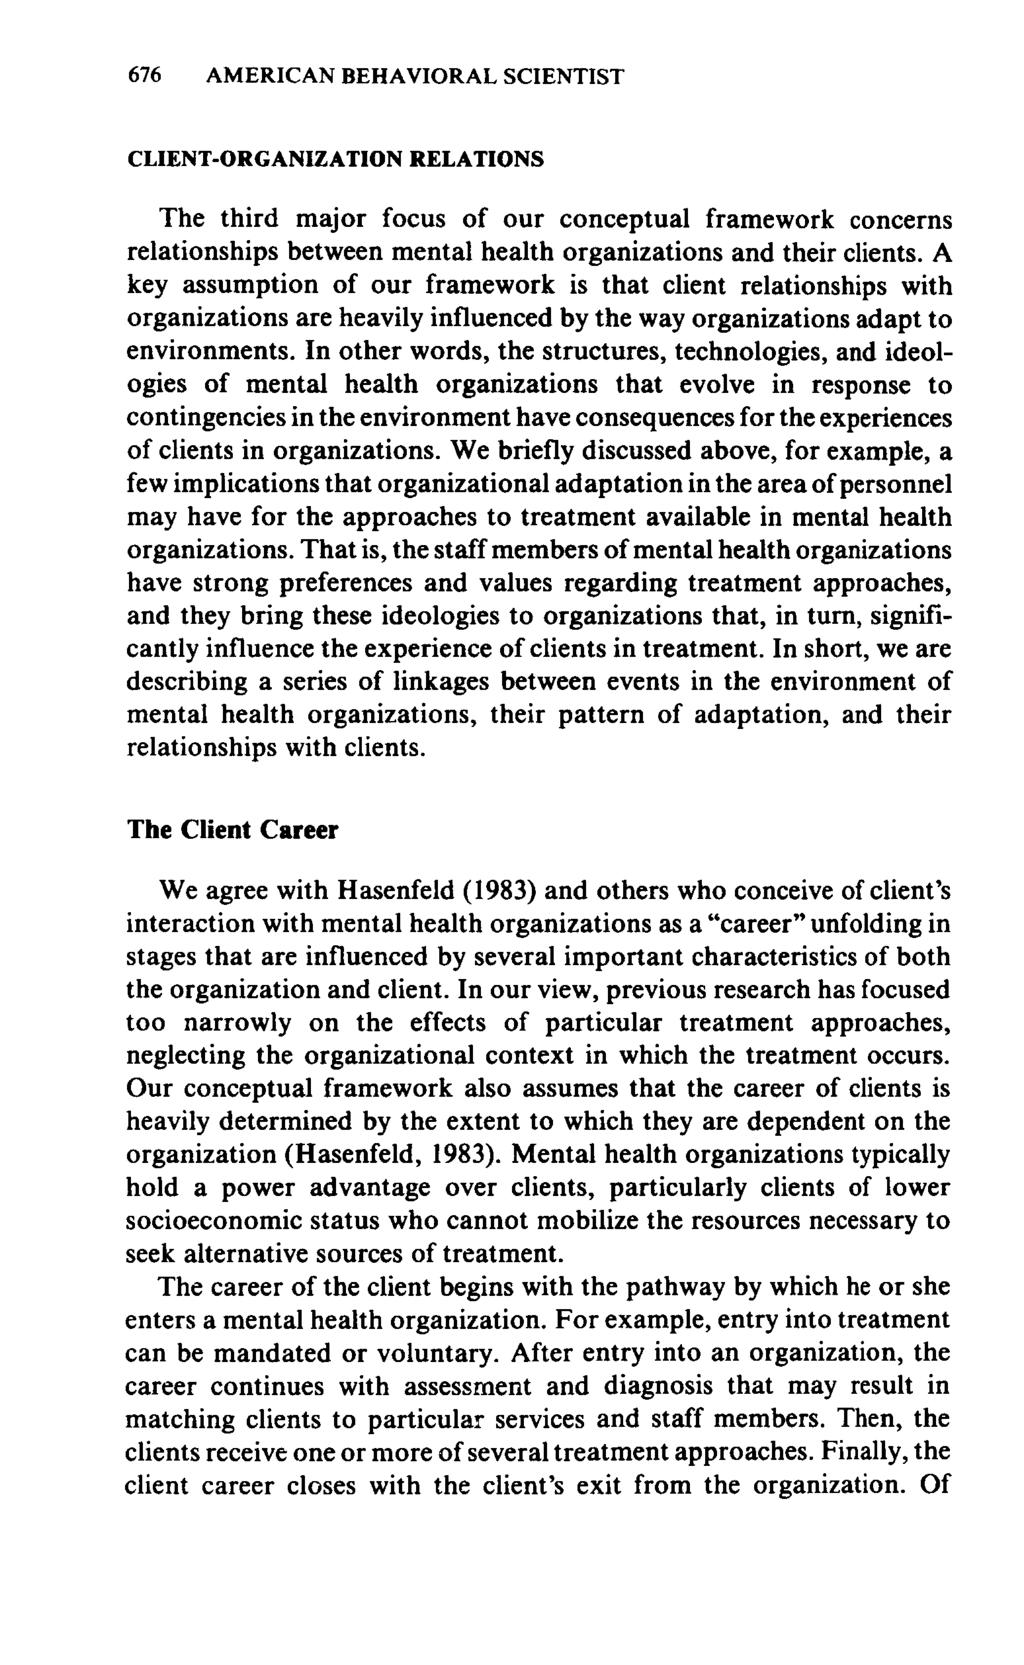 676 CLIENT-ORGANIZATION RELATIONS The third major focus of our conceptual framework concerns relationships between mental health organizations and their clients.